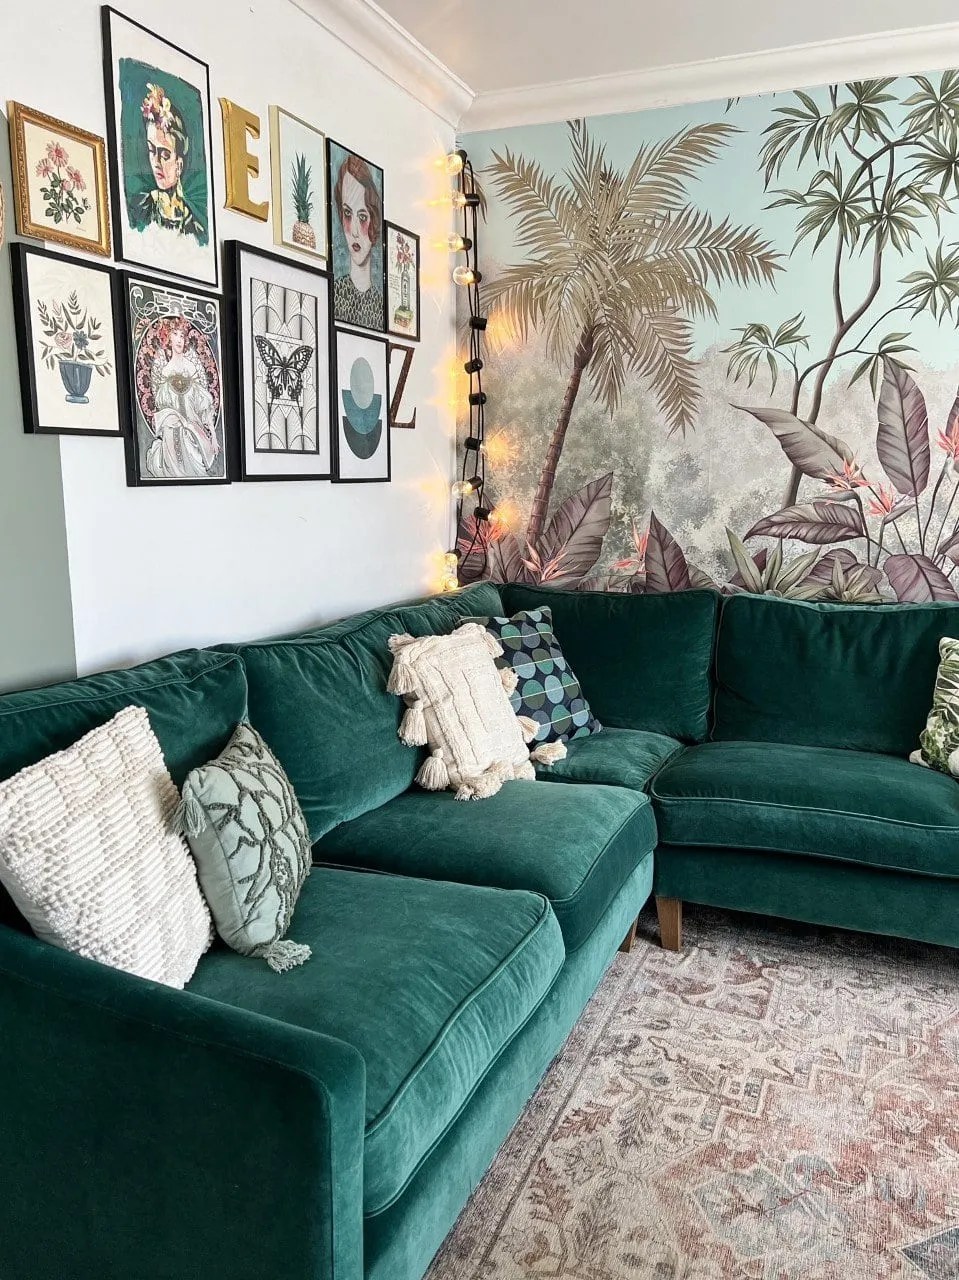 gallery wall, tangled jungle wallpaper and green velvet sofa in the living room